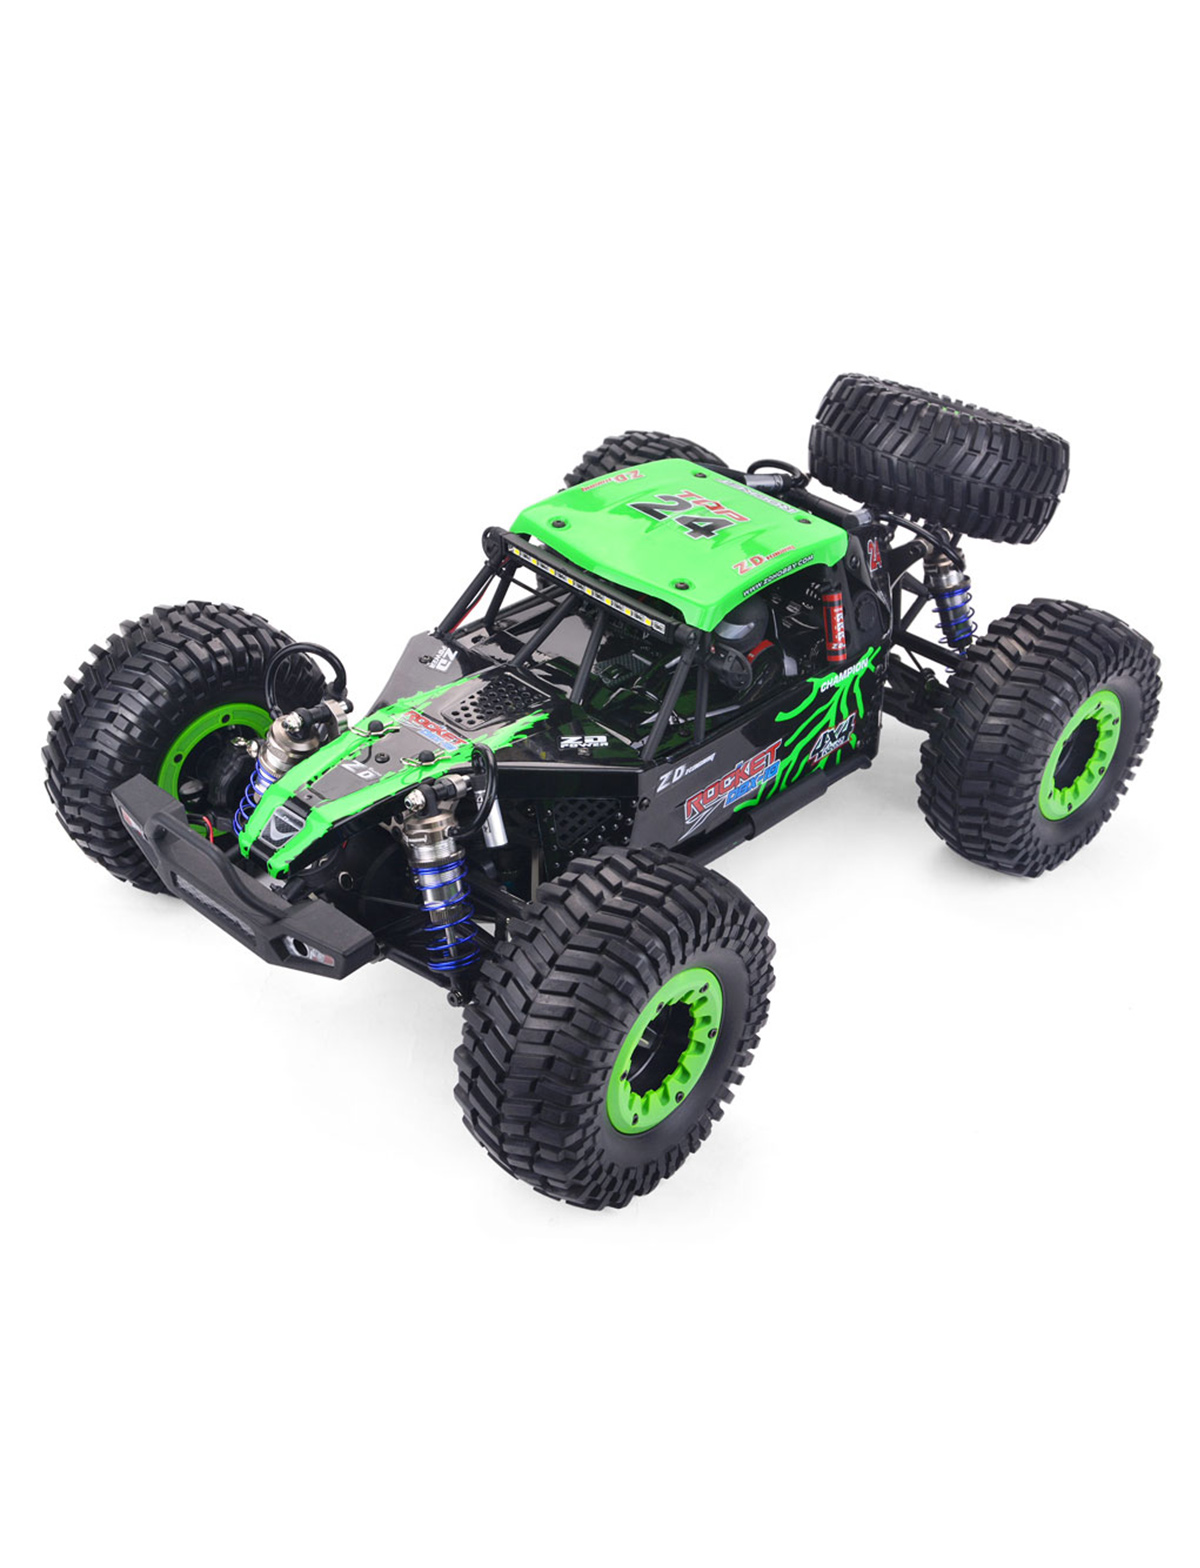 NEWEST 1_10 4WD remote control desert buggy truck RTR